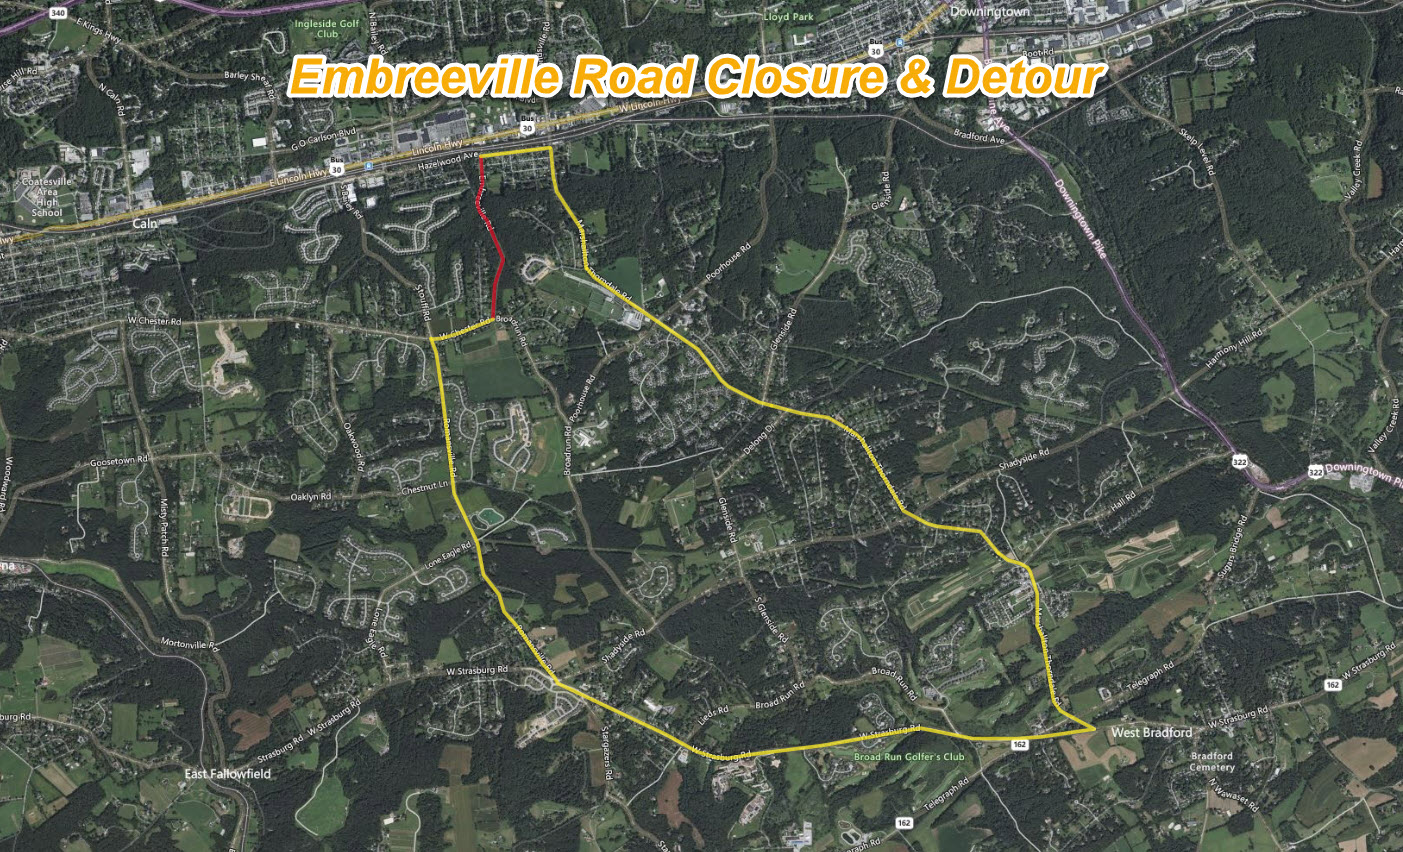 Embreeville Road Closure and Detour.jpg